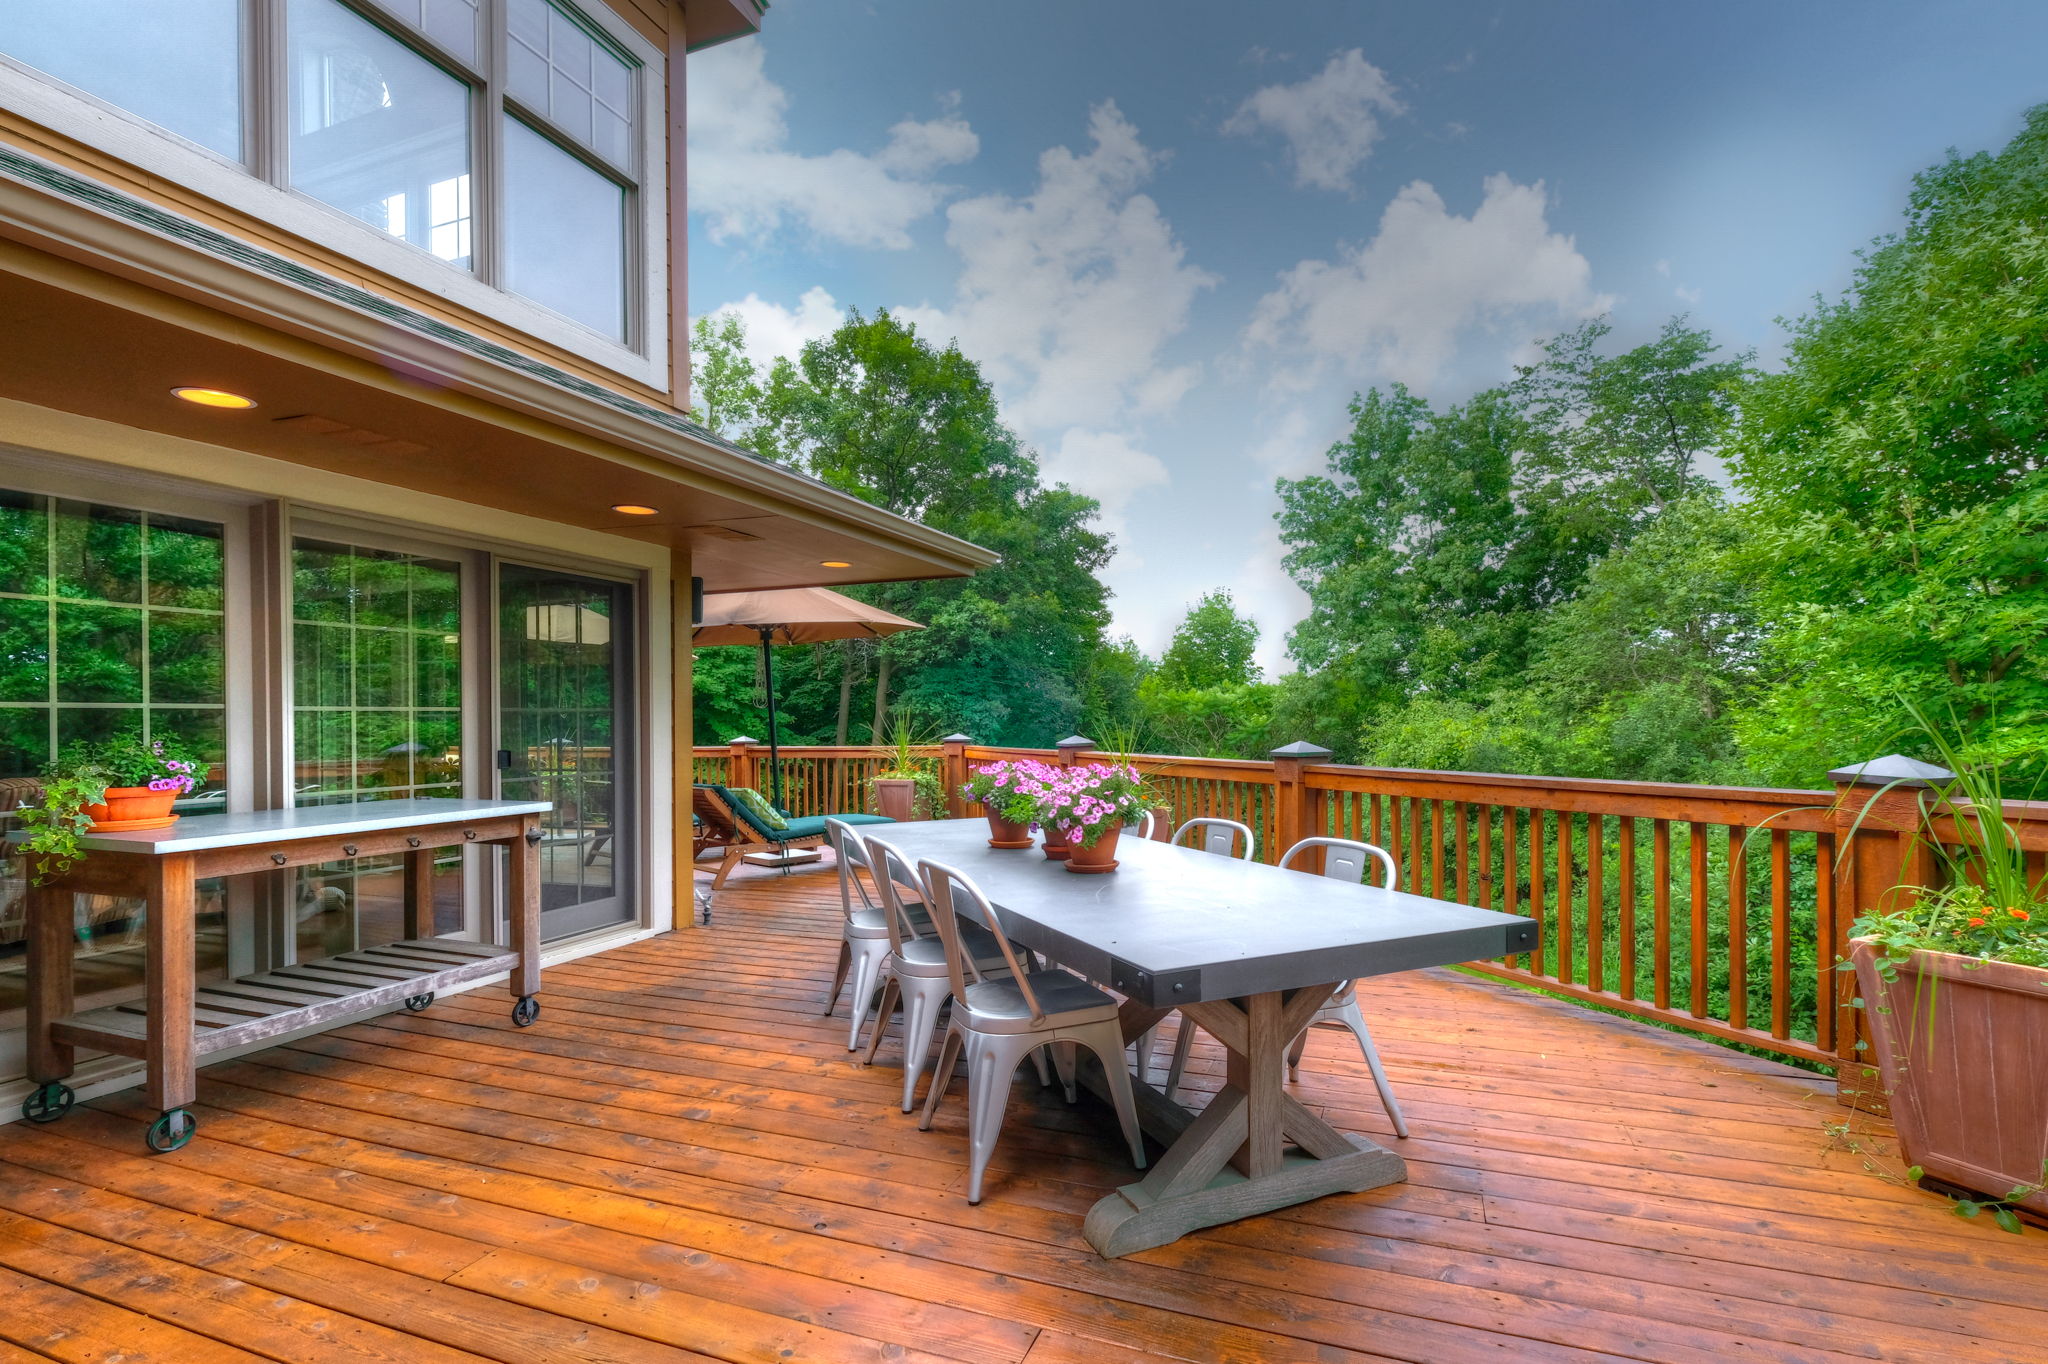 Spacious deck complete with wood burning fireplace and gas grill